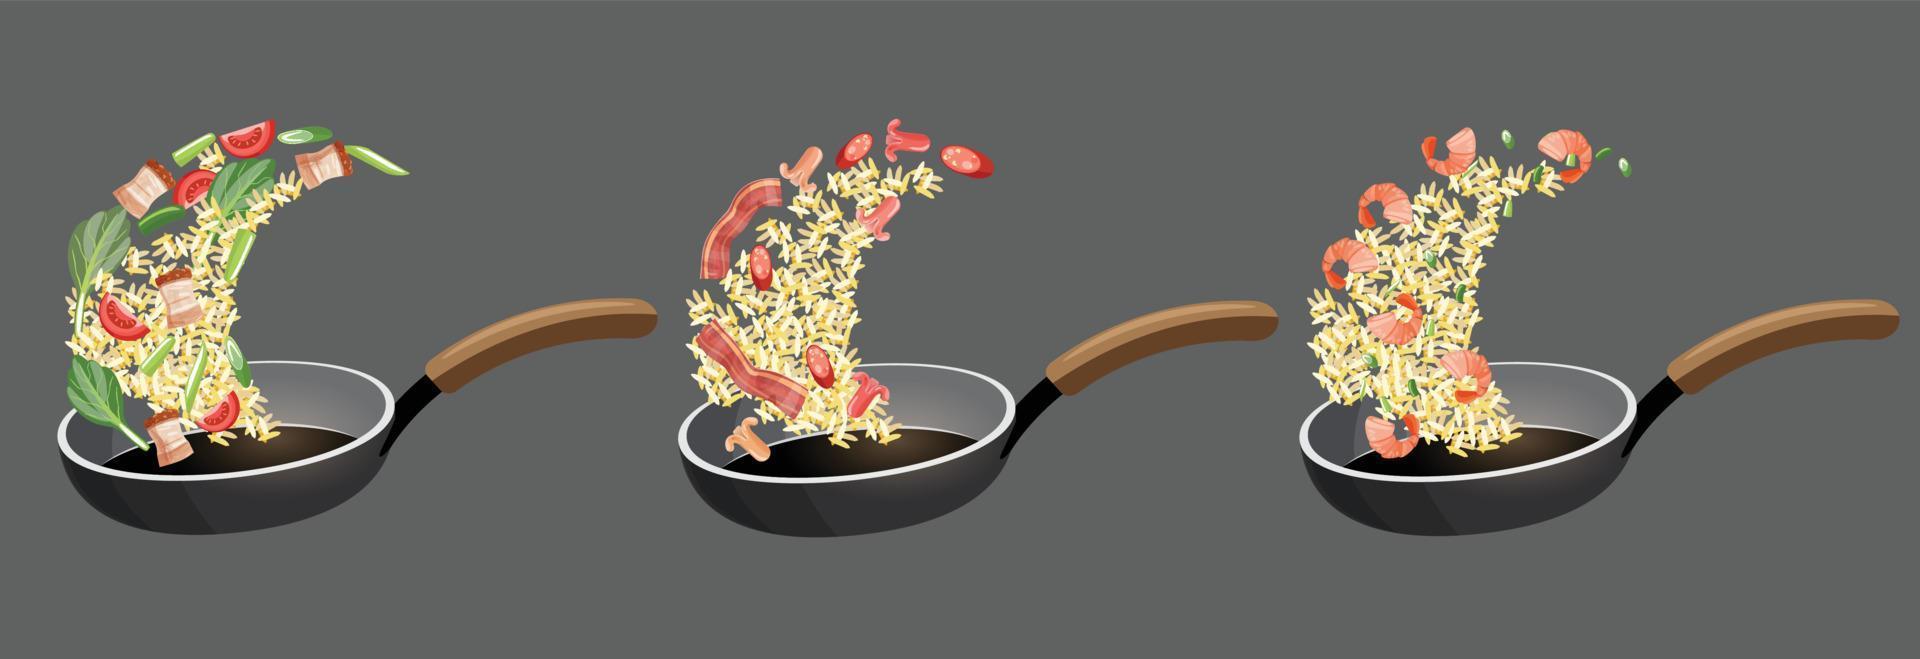 set of fried rice cooking in a pan vector illustration